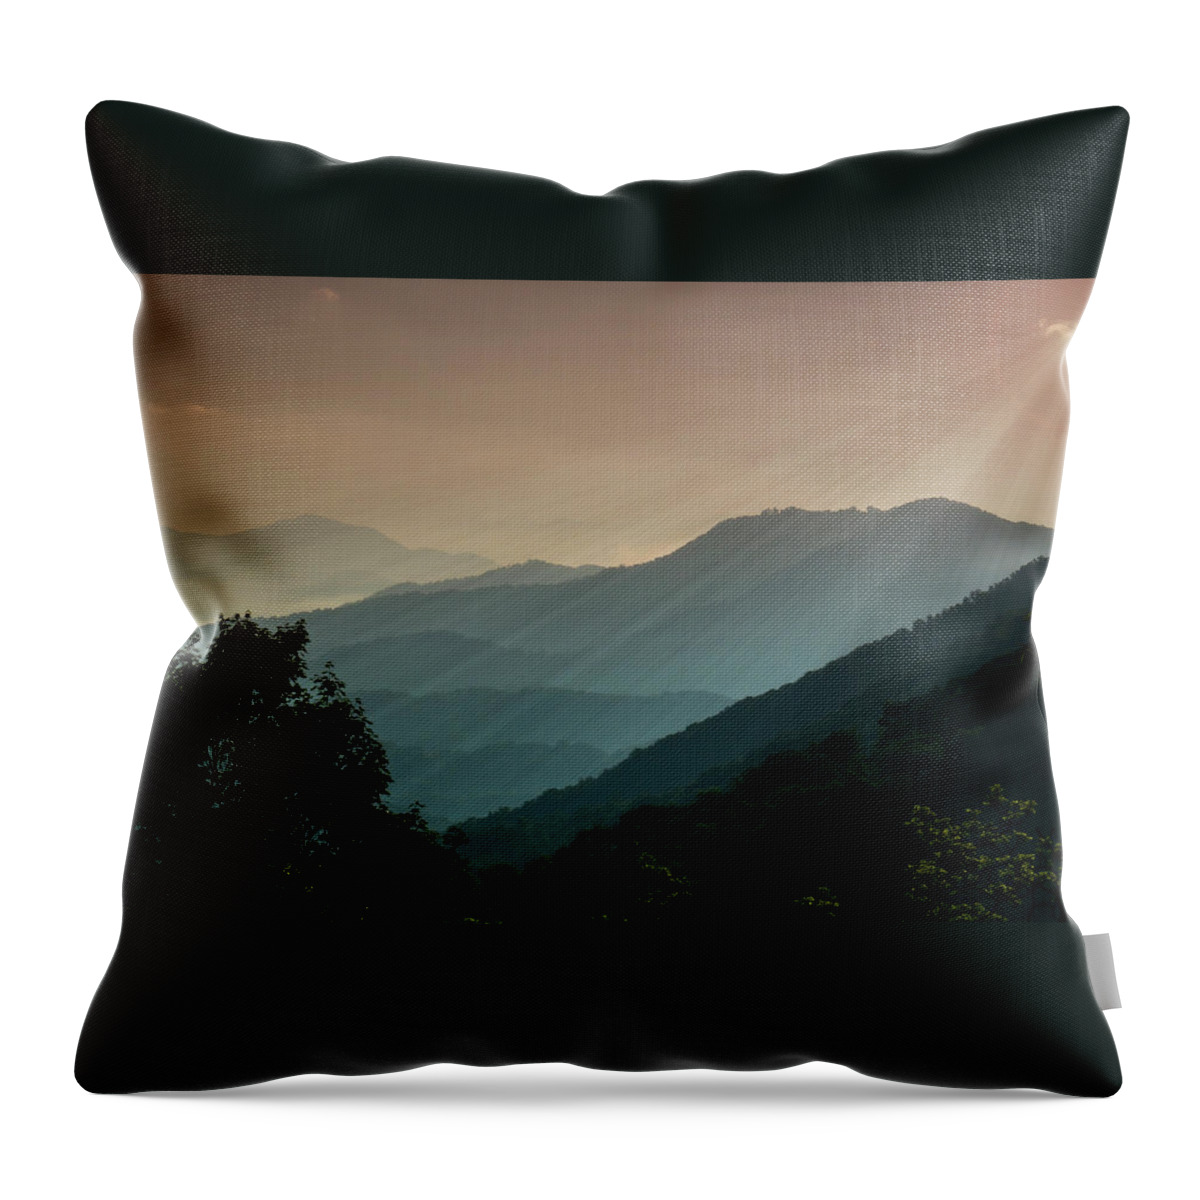 Blue Throw Pillow featuring the photograph Great Smoky Mountains Blue Ridge Parkway by Patti Deters